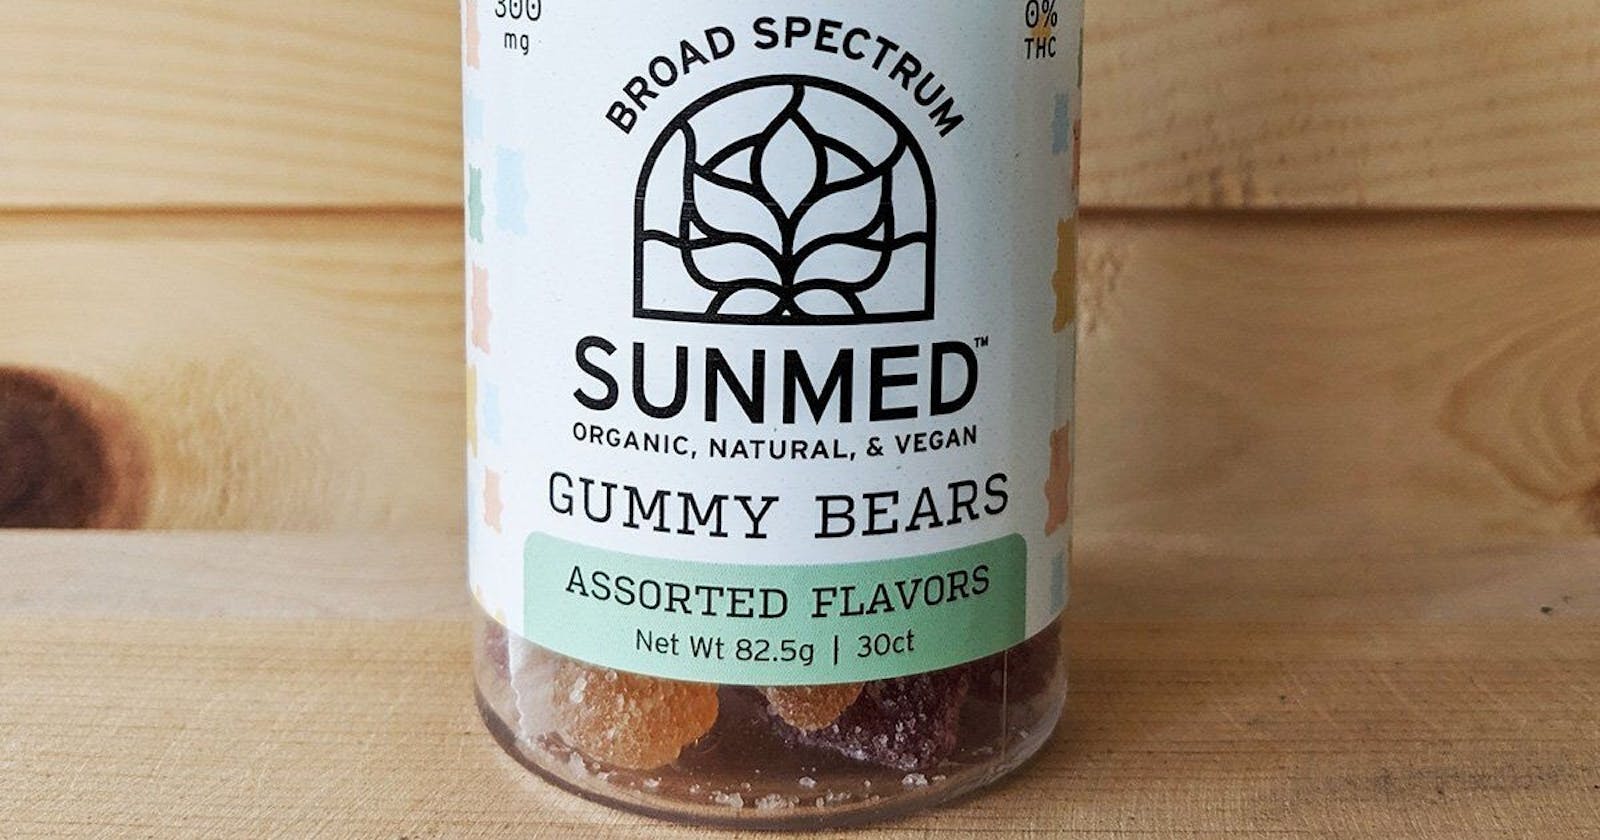 Sunmed CBD Gummies – Gives You More Energy Or Just A Hoax!